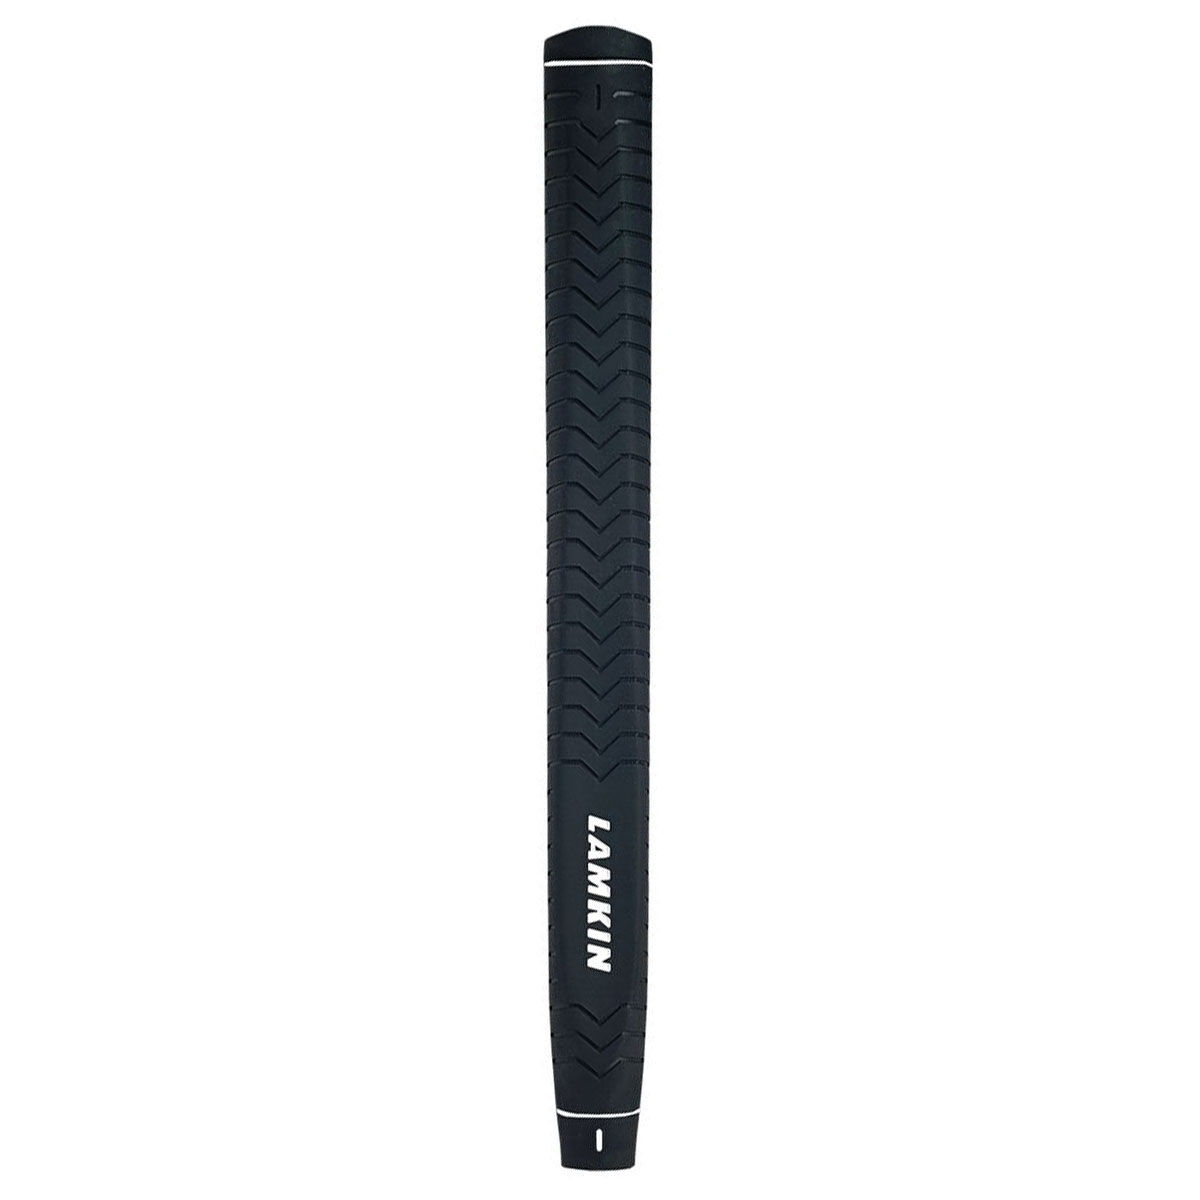 Lamkin Black Deep Etched Paddle Golf Putter Grip, Size: One Size | American Golf